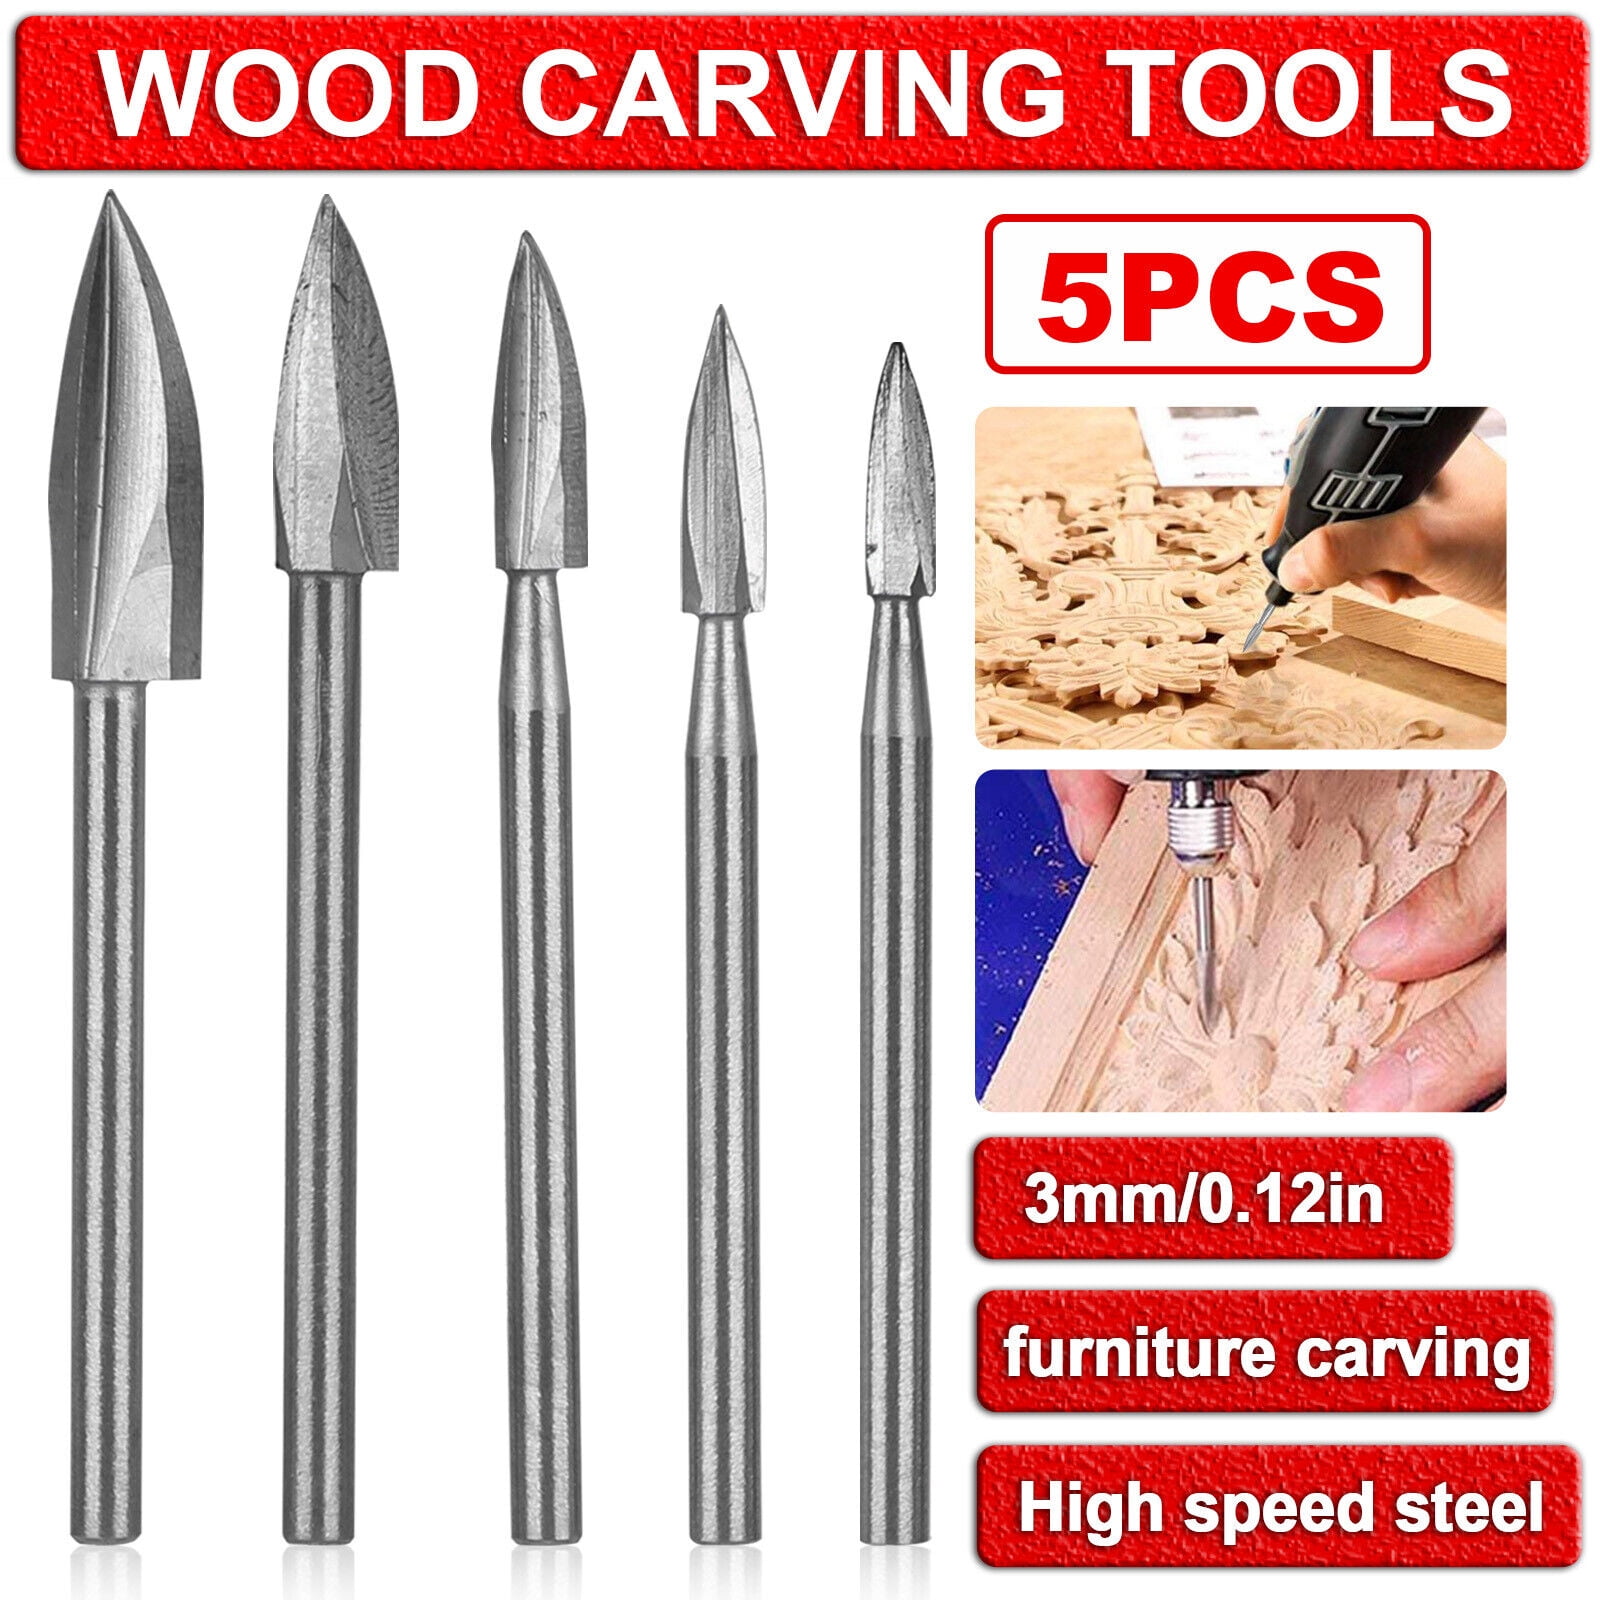 FOTYBEI Wood Carving Drill Bits Set for Dremel Rotary Tool 5pcs Engraving Drill Accessories Bit Wood Crafts Grinding Woodworking Tool with 1/8” Shank